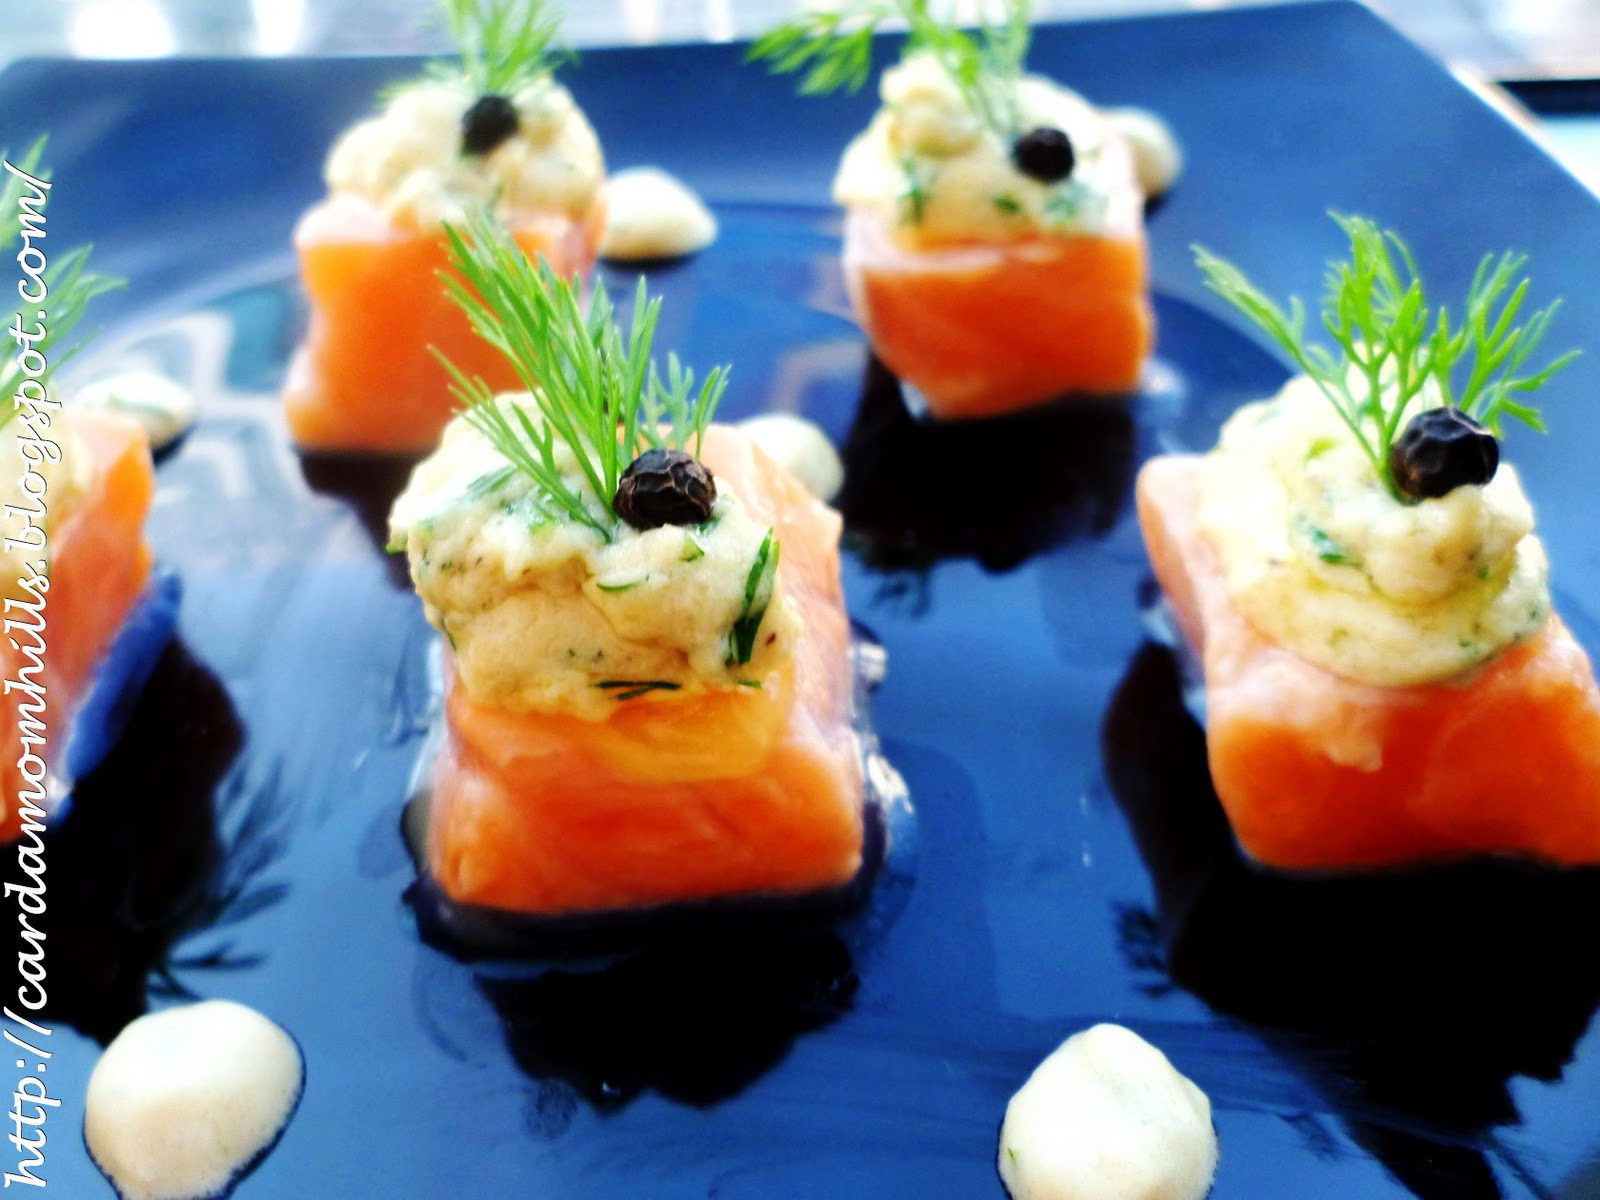 Dill Sauce For Smoked Salmon
 Cardamom Hills SMOKED SALMON WITH SPICY DILL SAUCE AN